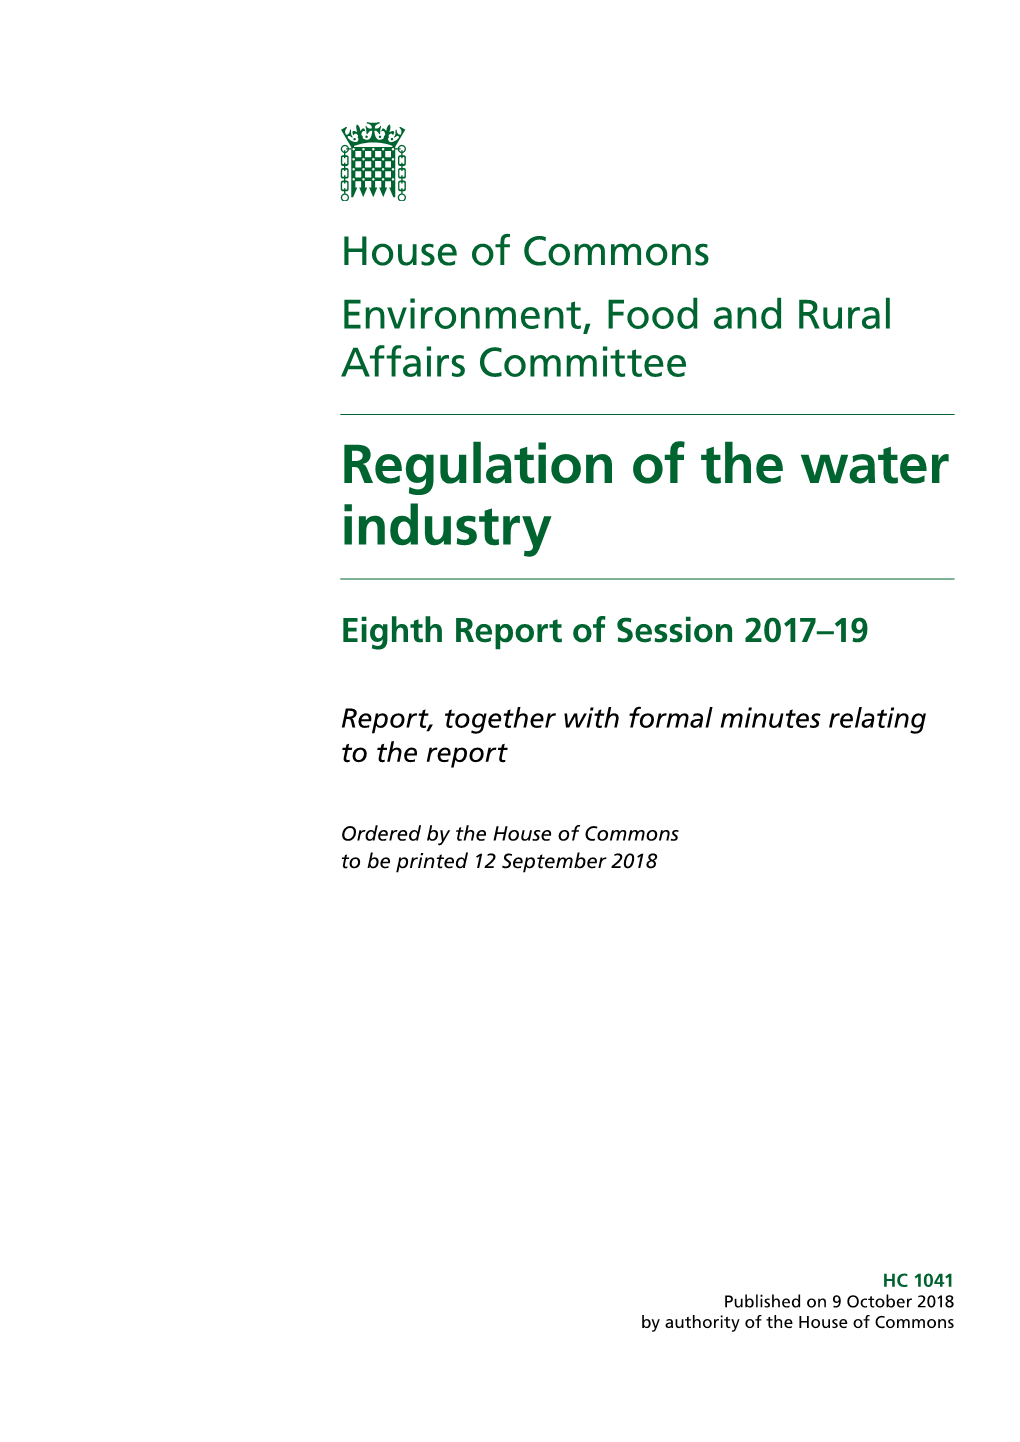 Regulation of the Water Industry